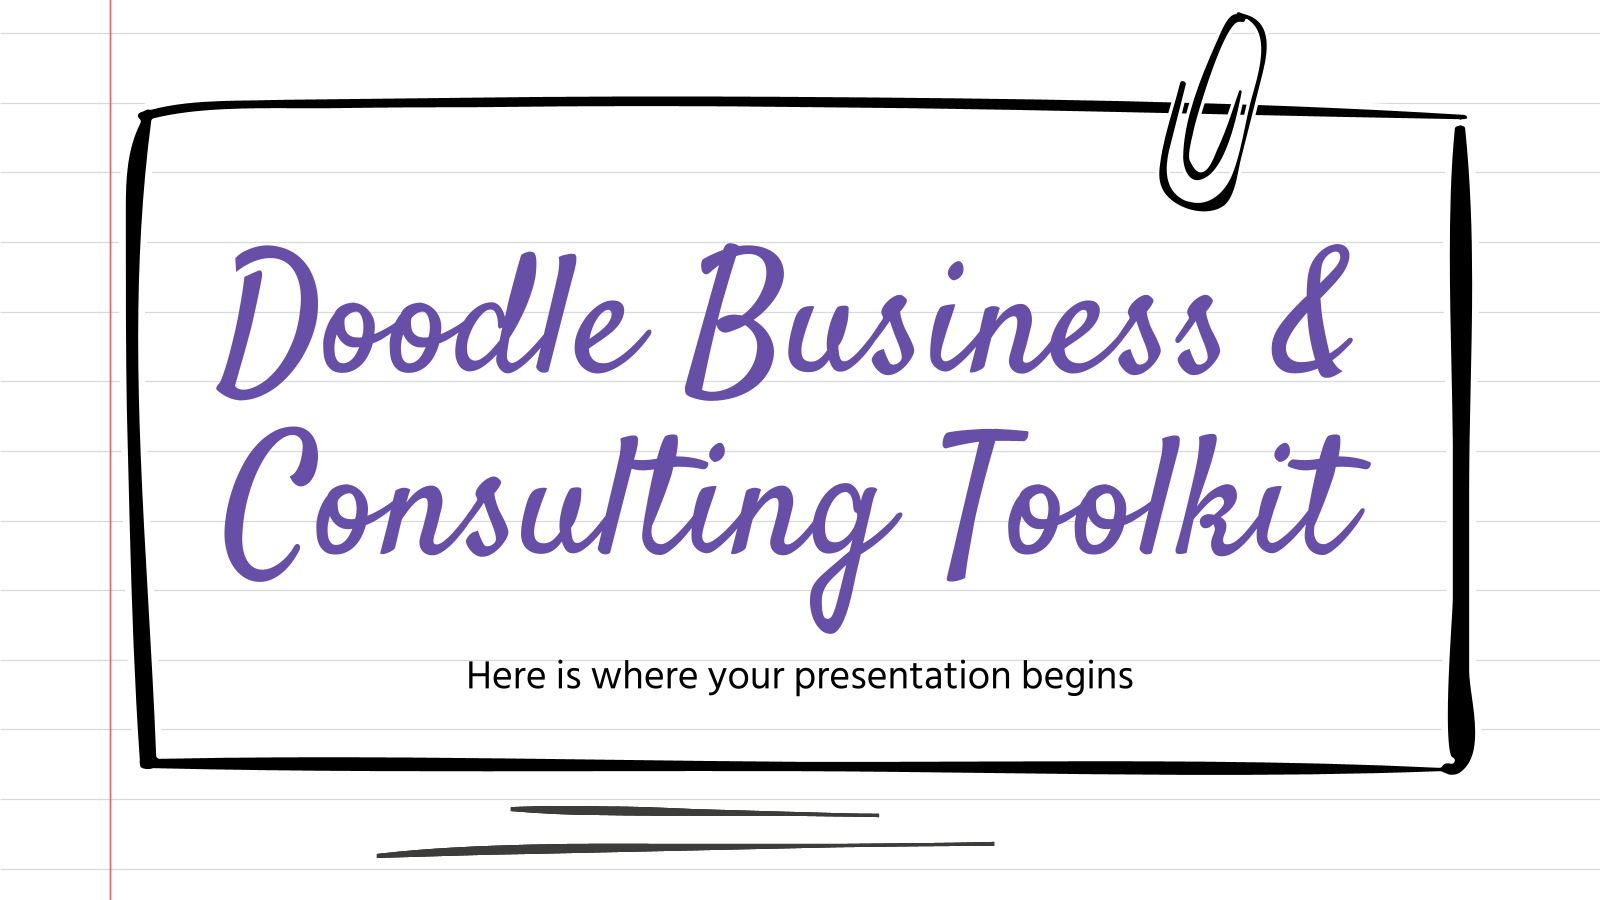 Doodle Business&Consulting Toolkit PPT